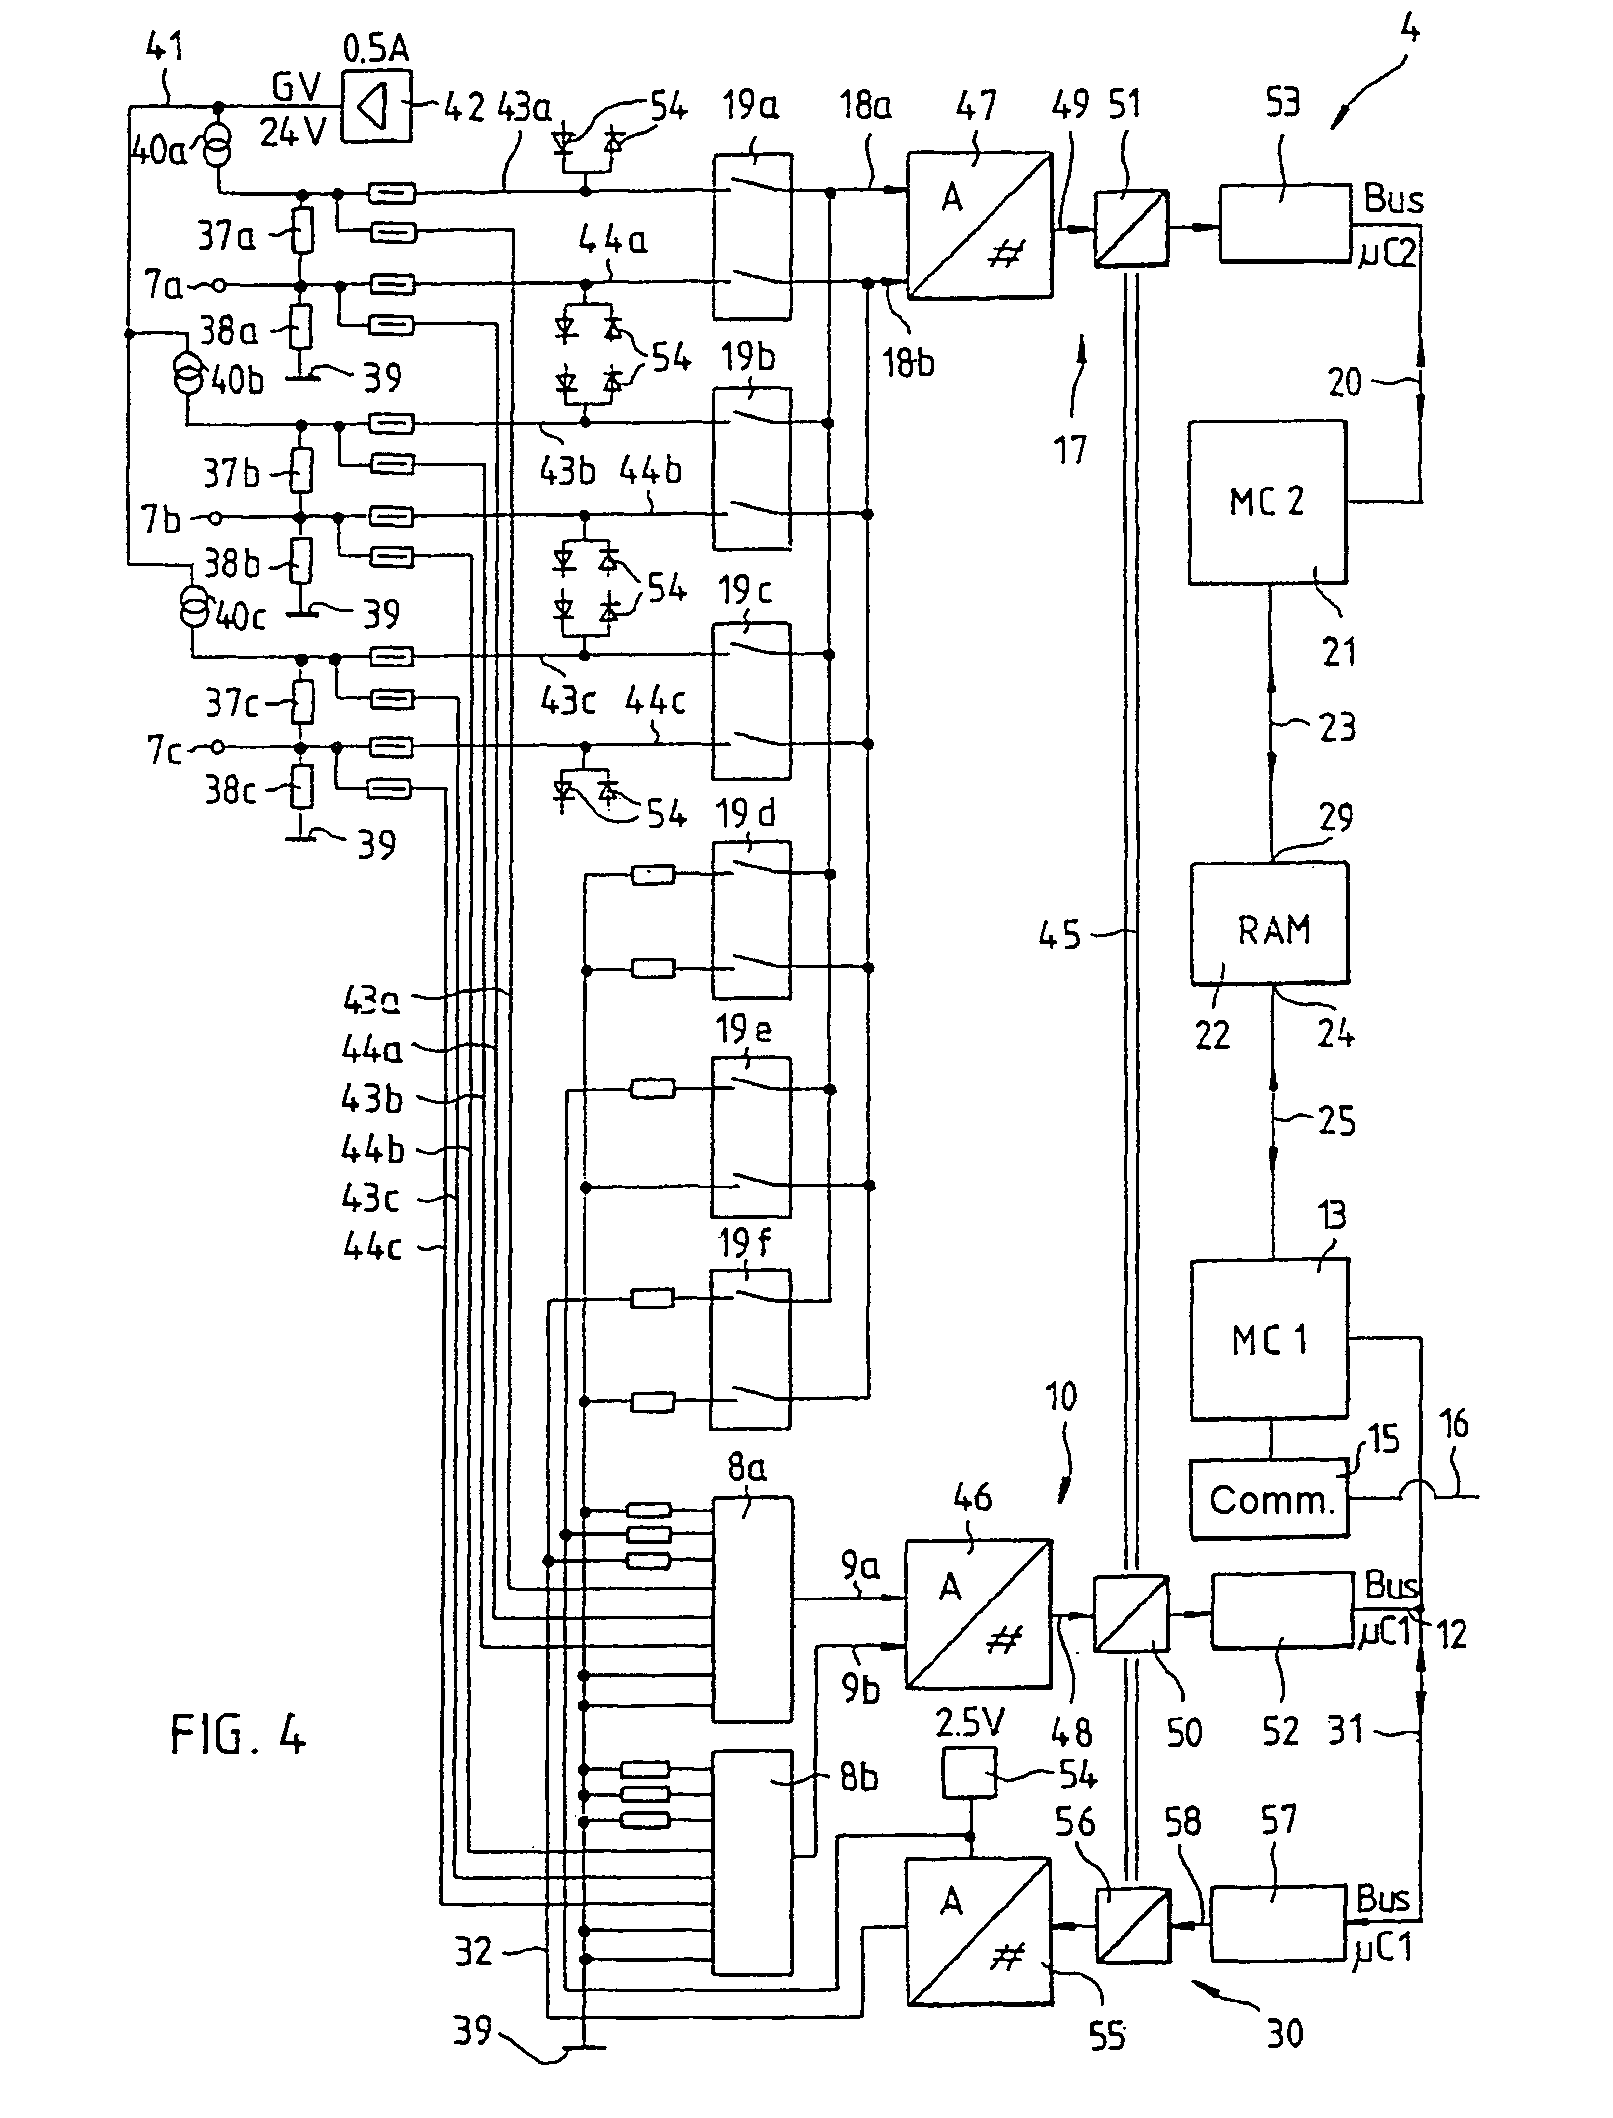 Peripheral component with high error protection for stored programmable controls